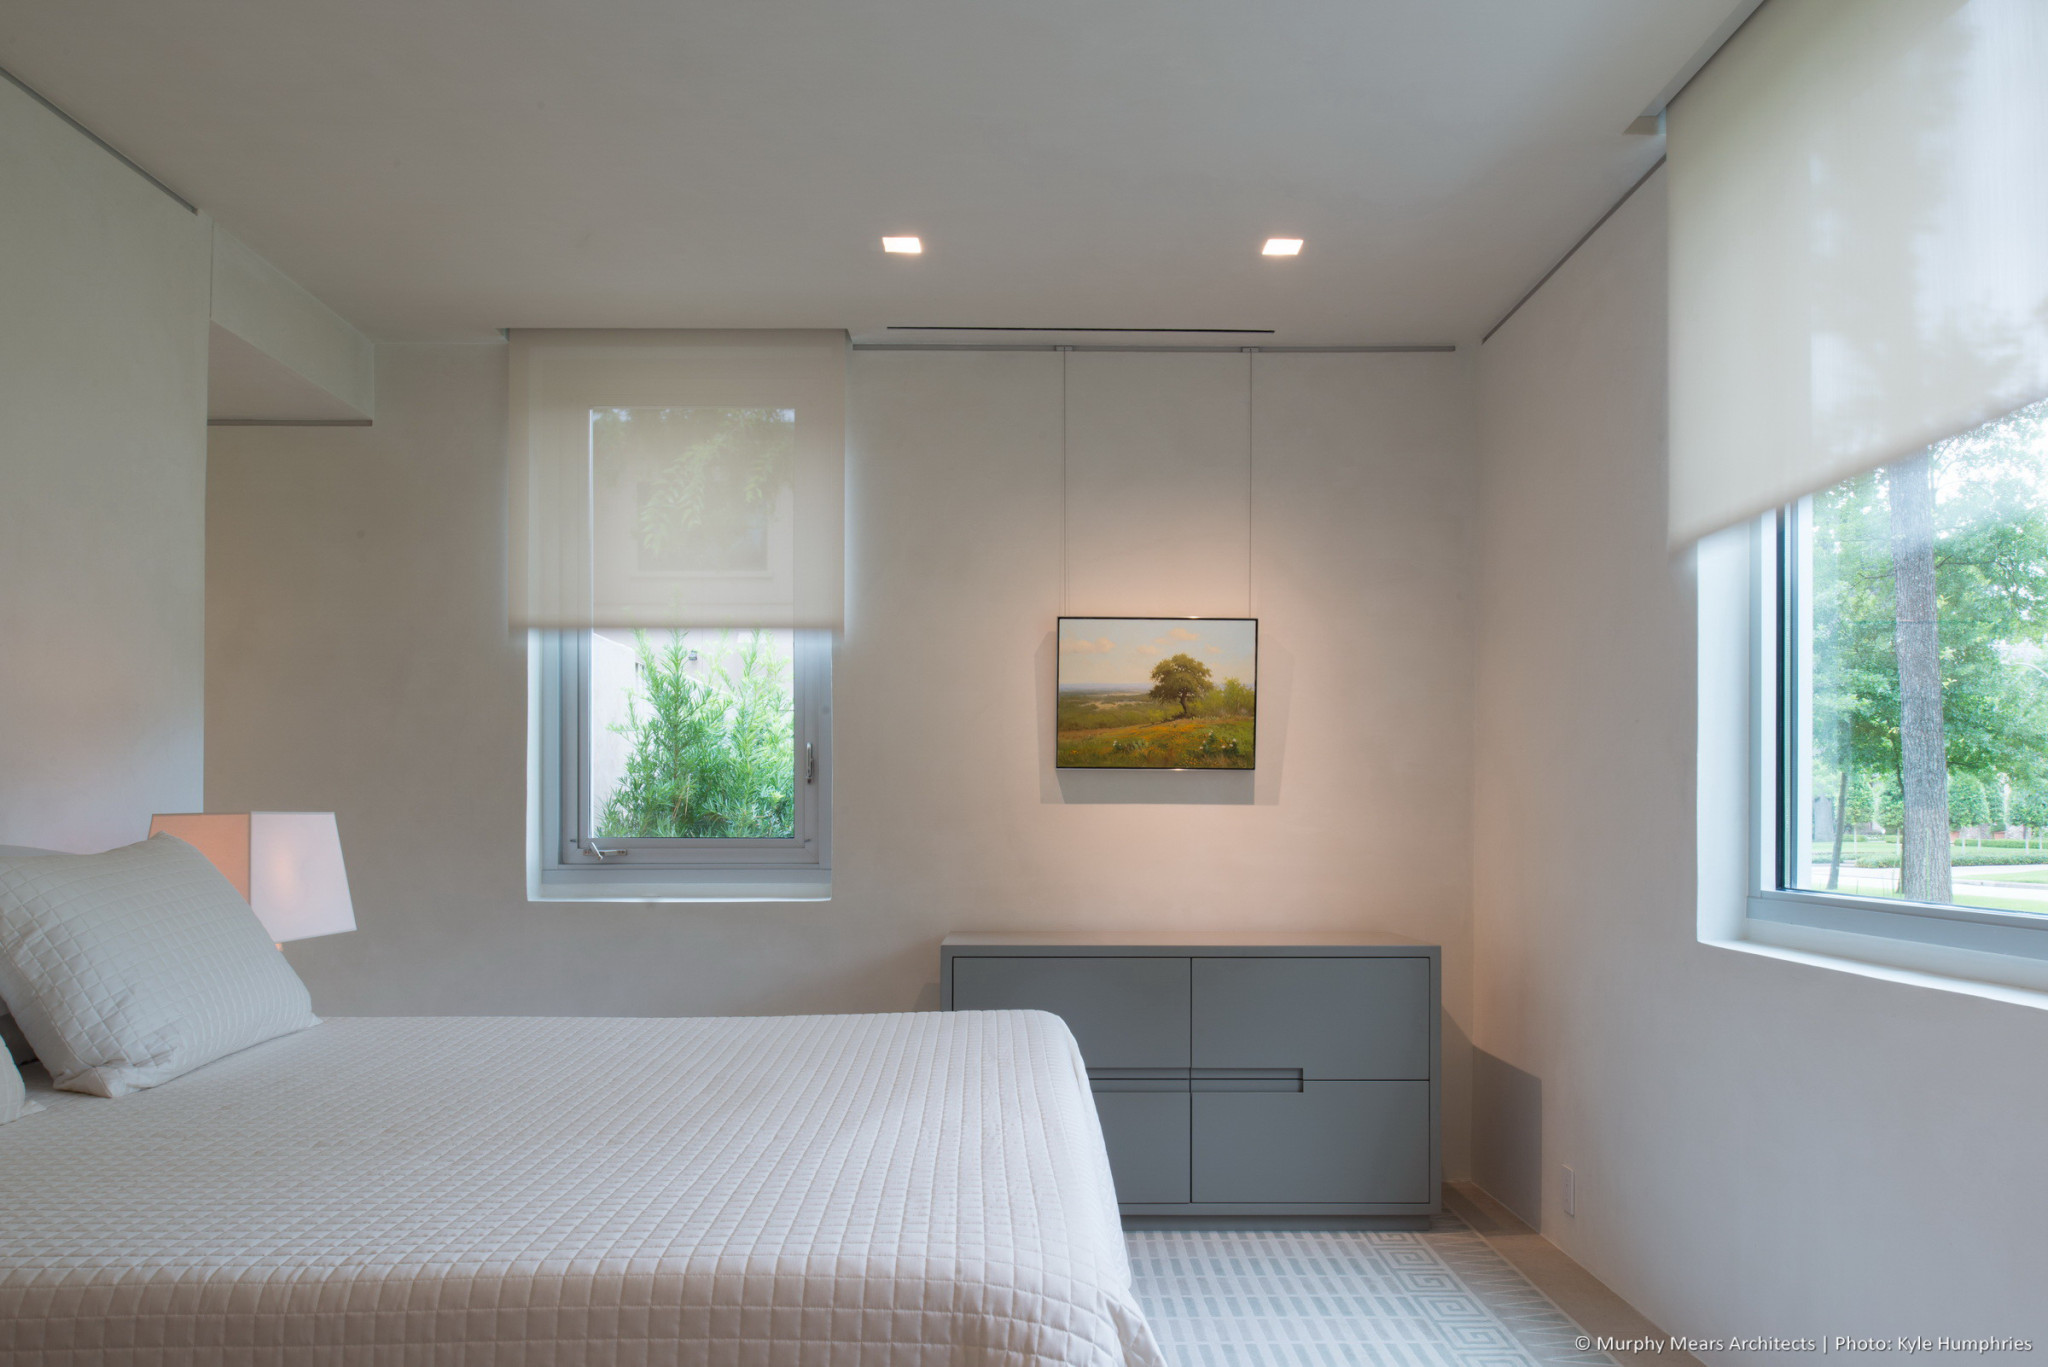 Guest bedroom with automated shades raising into hidden pockets above the West and South windows.